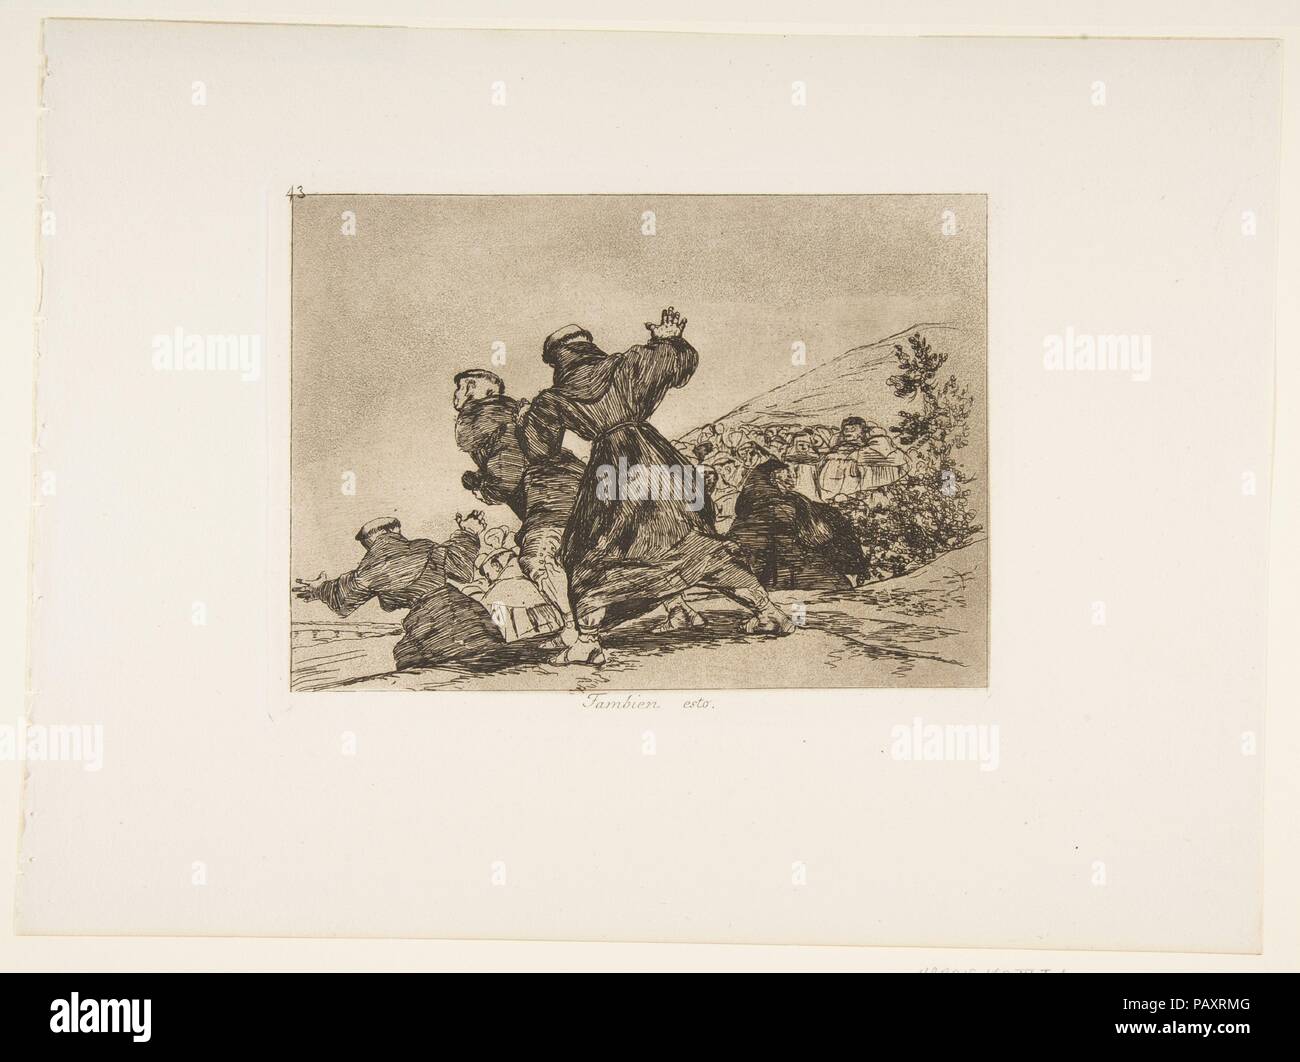 Plate 43 from 'The Disasters of War' (Los Desastres de la Guerra): 'This too.' (Tambien esto.). Artist: Goya (Francisco de Goya y Lucientes) (Spanish, Fuendetodos 1746-1828 Bordeaux). Dimensions: Plate: 6 1/8 × 8 1/8 in. (15.5 × 20.6 cm)  Sheet: 9 15/16 × 13 7/16 in. (25.2 × 34.2 cm). Series/Portfolio: The Disasters of War. Date: 1810 (published 1863). Museum: Metropolitan Museum of Art, New York, USA. Stock Photo